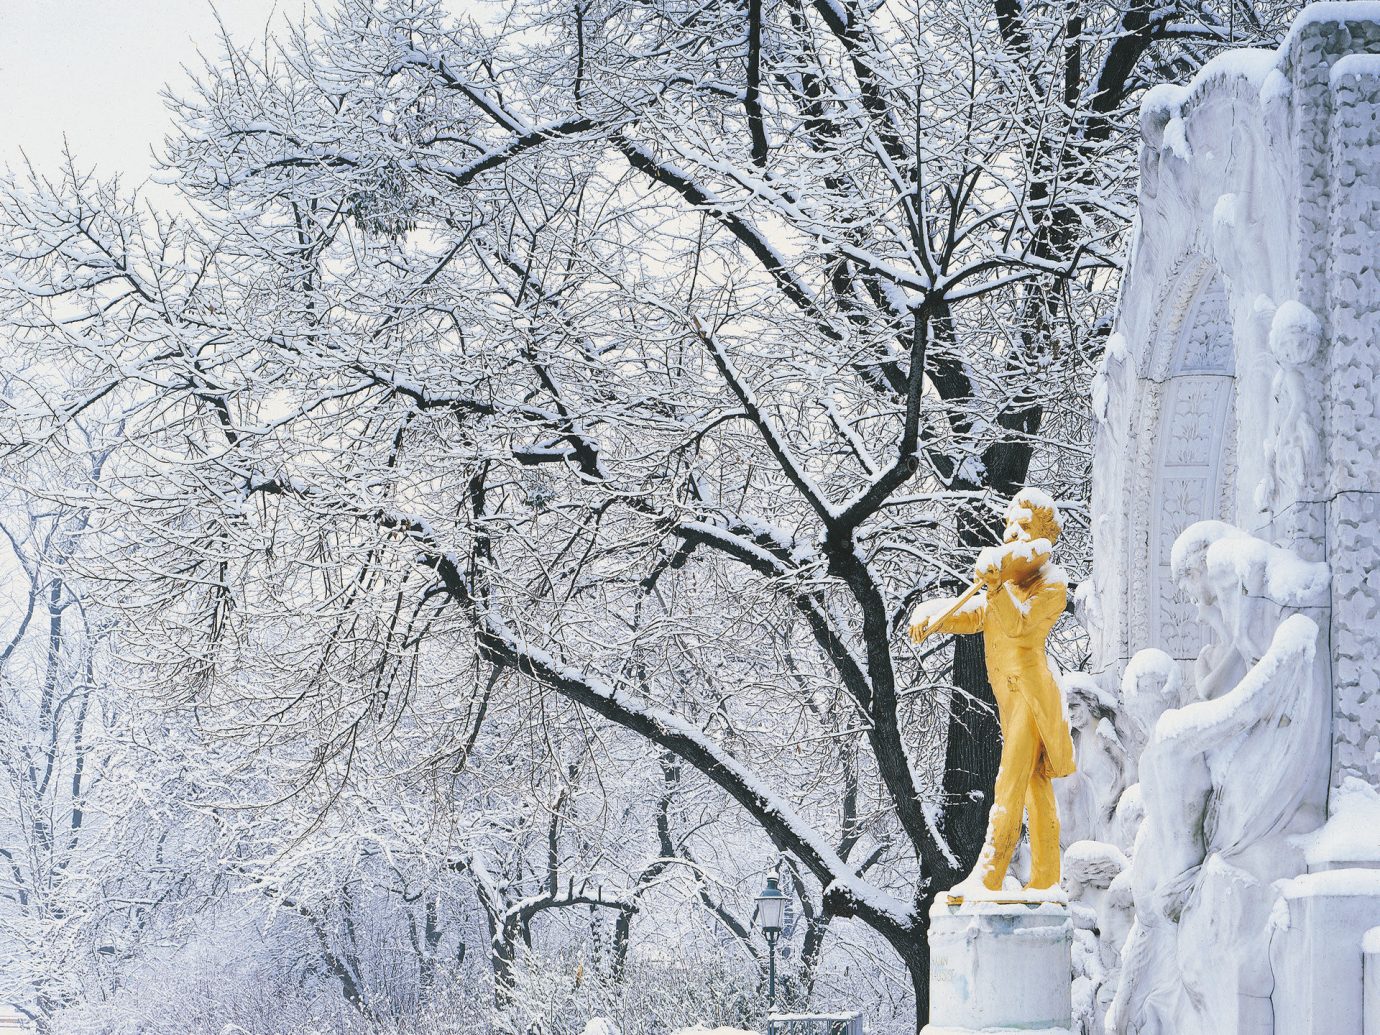 europe Outdoors park quaint snow statue trees Trip Ideas Winter tree outdoor weather freezing season ice branch frost winter storm spring blizzard flower